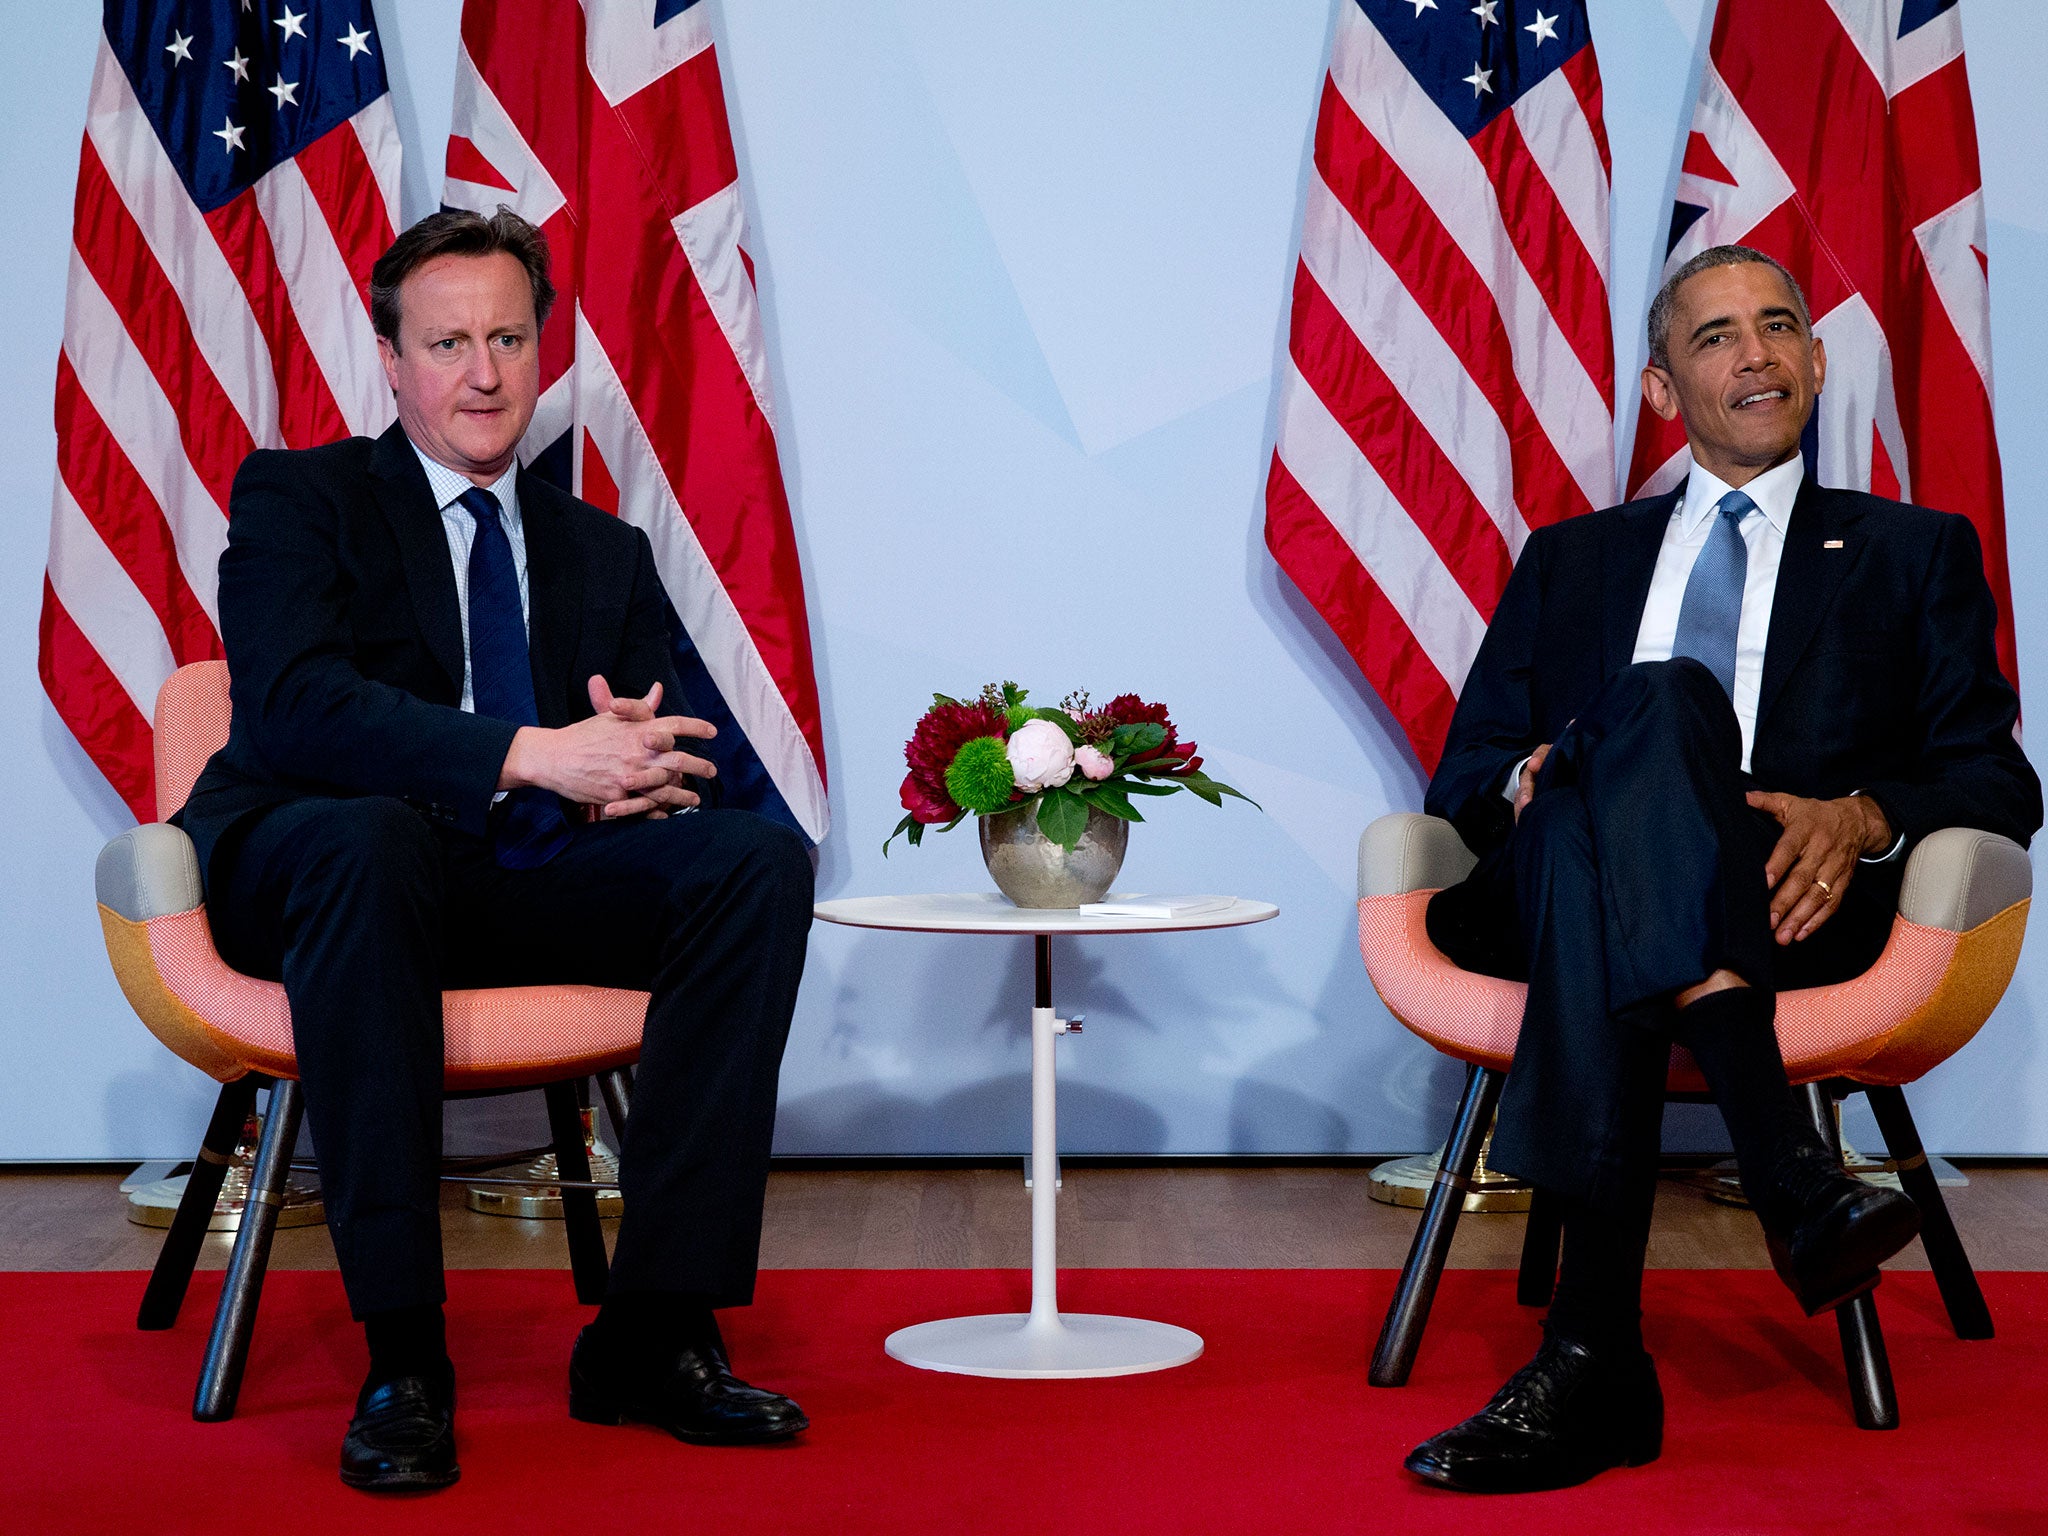 David Cameron has warned President Obama that he can no longer promise the Government will keep its commitment to maintain Britain's defence budget in the face of further austerity